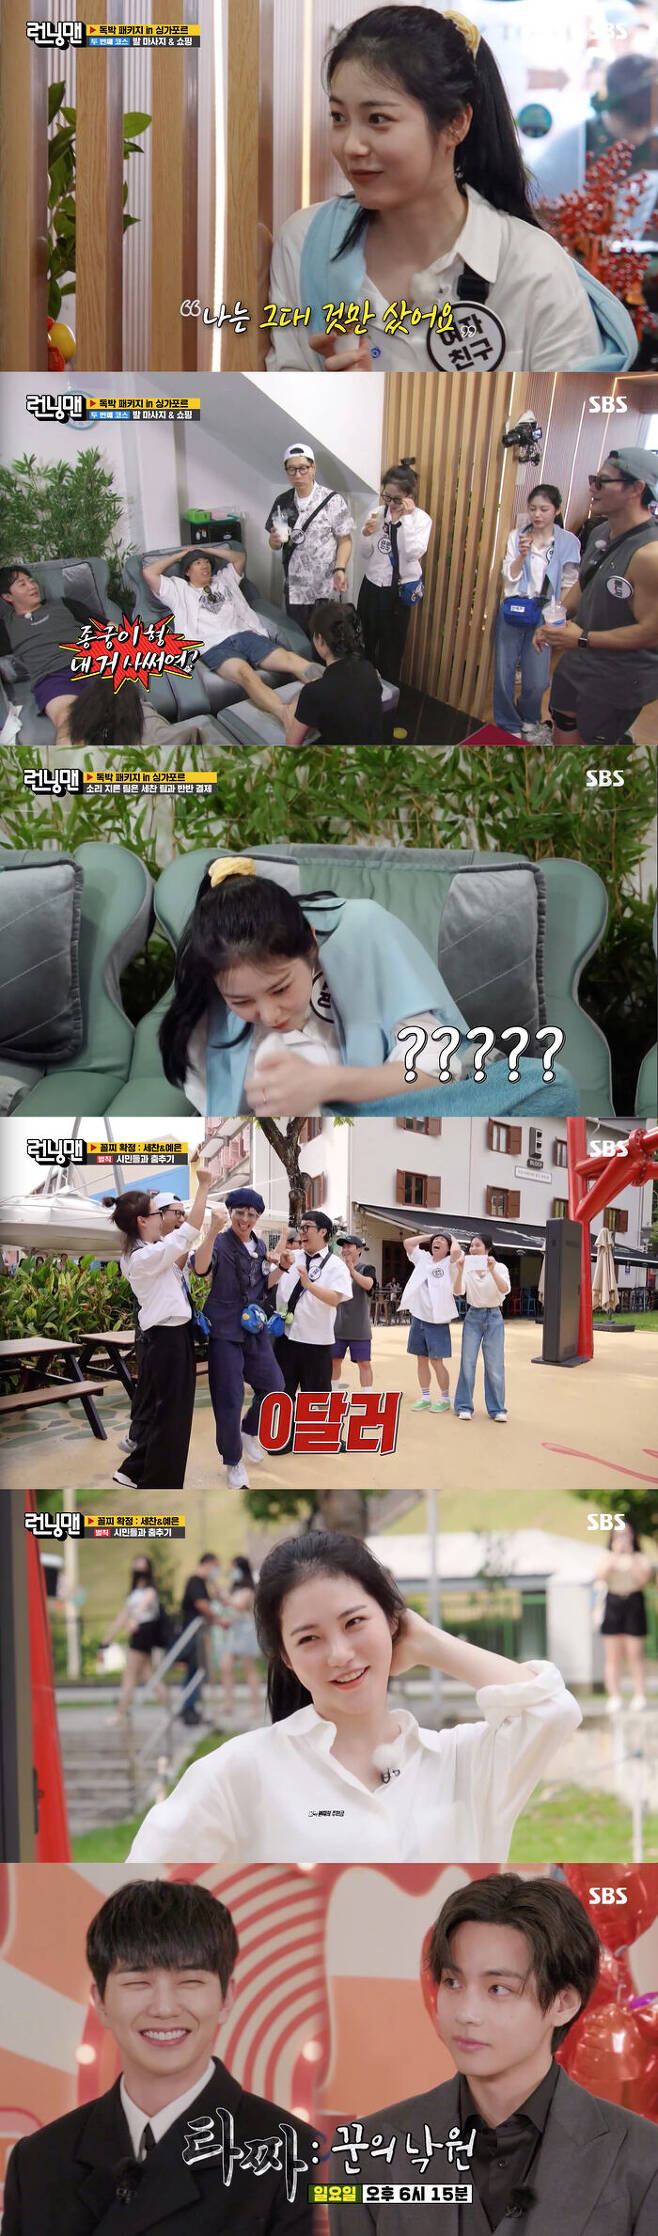 Shin Ye-eun has been chosen as the entertainment god.On the 26th SBS Running Man, Singapore Travel Special 2 was held.On the day of the show, the members decided on a team to use the mission through the mission. The team that left the most money won the championship, and the team with the most debt was penalized.According to the rules, the members spent their money on the idea that they should not be caught.Yang Se-chan, the first of the members who went to get a foot massage. Yang Se-chan Shin Ye-eun team won a foot massage.When Yang Se-chan asked me to choose a person to massage, Yang Se-chan chose the strongest person and had no choice but to scream.At that time, other members fell in love with shopping, especially Shin Ye-eun, who drew attention by putting what he wanted on the shopping list, including Yang Se-chan and Yang Se-chans family.After that, Shin Ye-eun gave Yang Se-chan, who is getting a foot massage, a thrill of I bought only you, and Yang Se-chan laughed at his forehead saying that he was in trouble.Hong Jin-ho asked Kim Jong-kook, Did you buy my brother? Kim Jong-kook looked at Hong Jin-hos body rather than answering the question, Whats wrong with your body? I pointed out.Shin Ye-eun suddenly put her foot to her nose and said, I dont smell like that. My sister said I could eat bibimbap with my toes.Its not that dirty, he said.Ji Seok-jin, who was watching this, was surprised that he was the first to smell his feet. At that time, Song Ji-hyo, who was next to Shin Ye-eun, put his feet on his nose and laughed.Shin Ye-eun showed off her amazing fun sense on the day. It was funny even if she could not play like a fool, and every action made her feel good.In the end, however, Shin Ye-eun Yang Se-chan finished last and challenged the slingshot to cancel the debt.Hong Jin-ho kneeled in front of Kim Jong-kook and said, I can not really do it.Se-chan Ye-eun, who successfully completed the Slingshot mission, won the opportunity to draw expenses, and Shin Ye-eun, surprisingly, won $0 out of $0 and $200, earning the envy of the members.The members called Shin Ye-eun, an artistic god, and asked him to come out next week.Meanwhile, at the end of the broadcast, Yoo Seung-ho BTS Vu and Taja-kuns Paradise race were announced, raising expectations for the next broadcast.